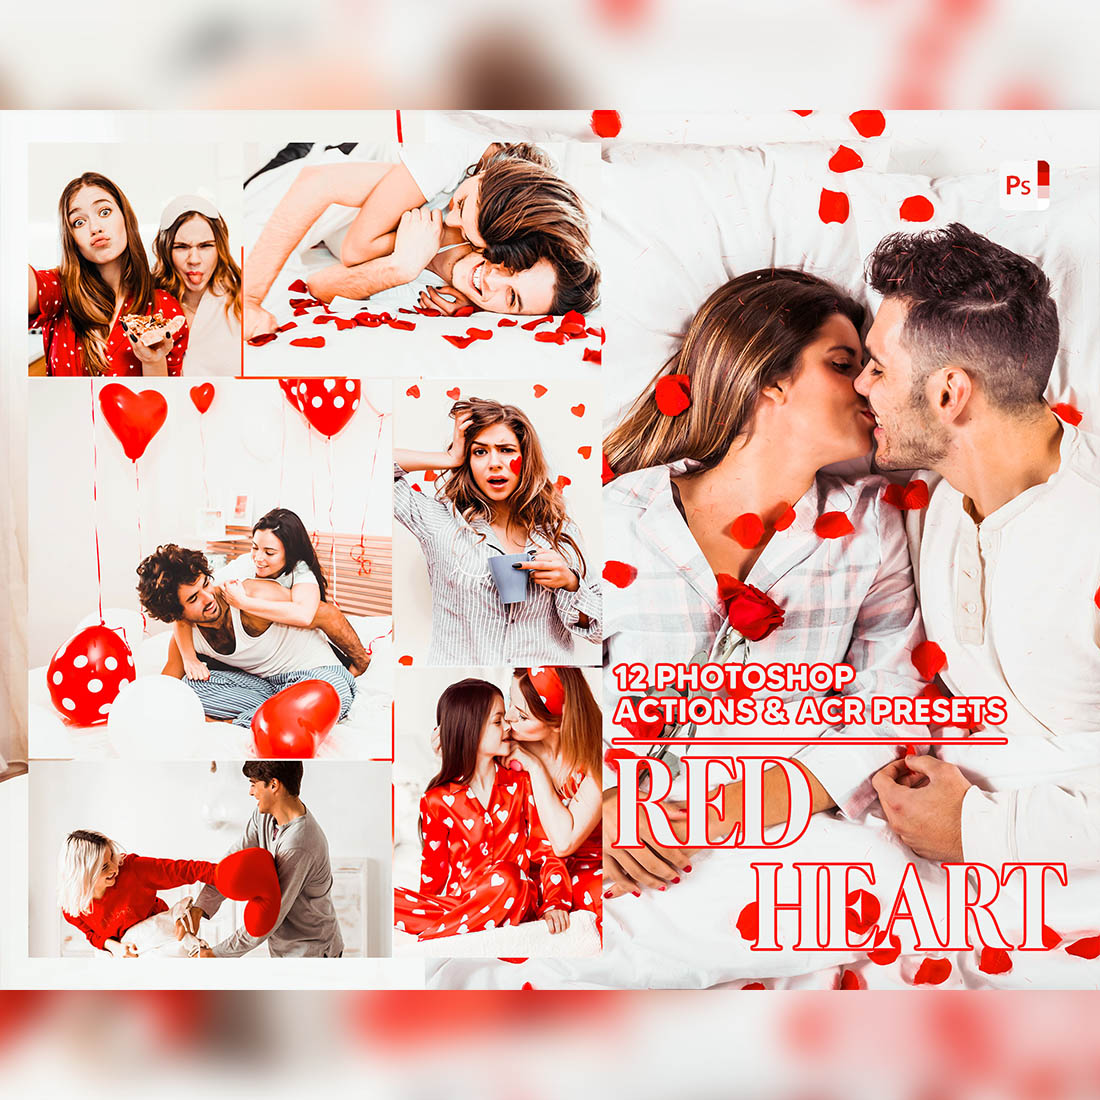 12 Photoshop Actions, Red Heart Ps Action, Love ACR Preset, Vibrant Ps Filter, Atn Portrait And Lifestyle Theme For Instagram, Blogger cover image.